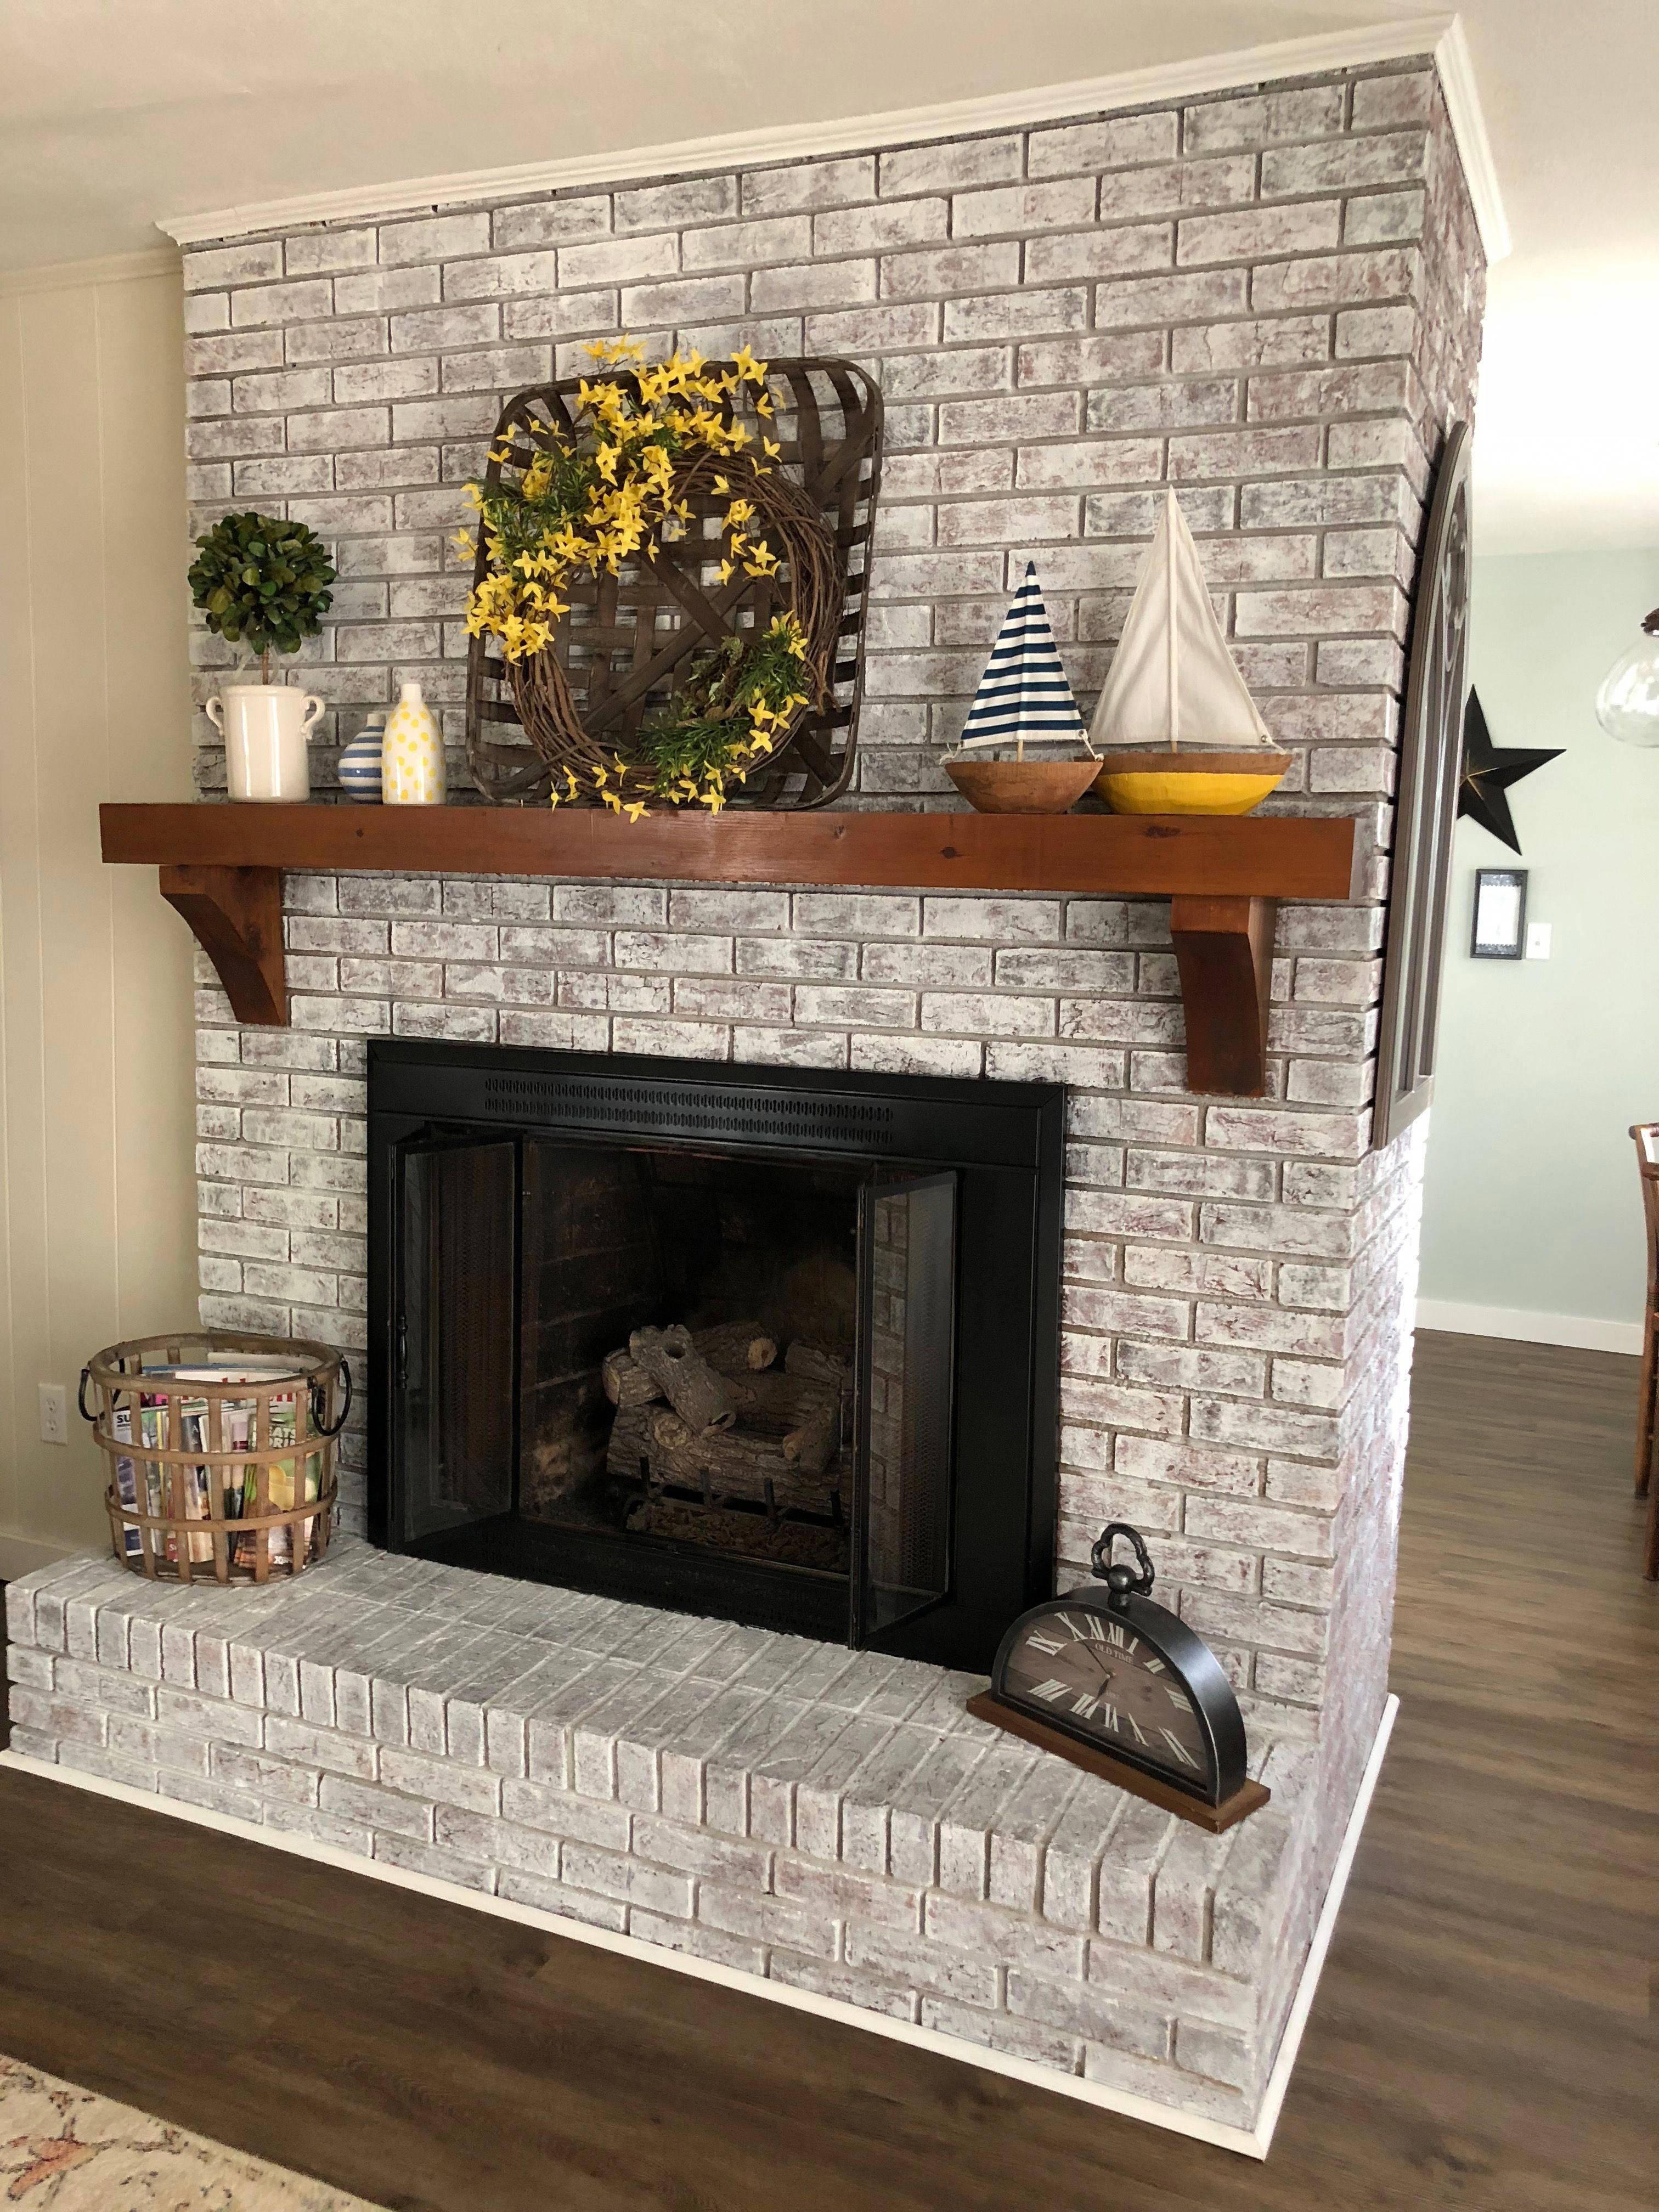 White Rock Fireplace Inspirational Painted Brick Fireplace Sw Pure White Over Dark Red Brick